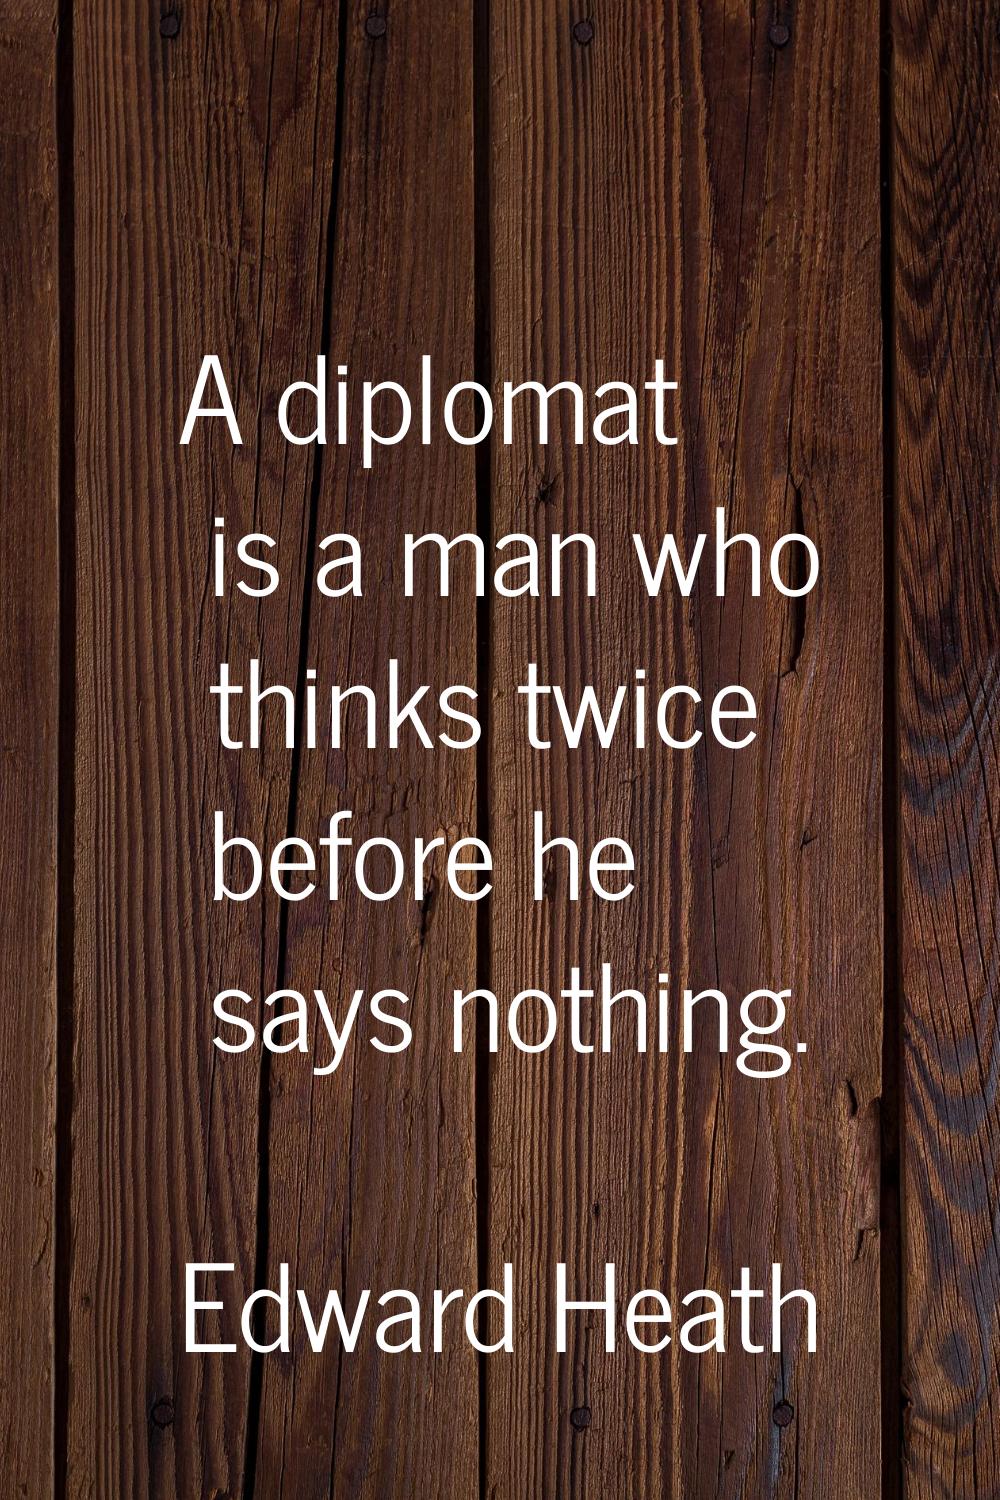 A diplomat is a man who thinks twice before he says nothing.